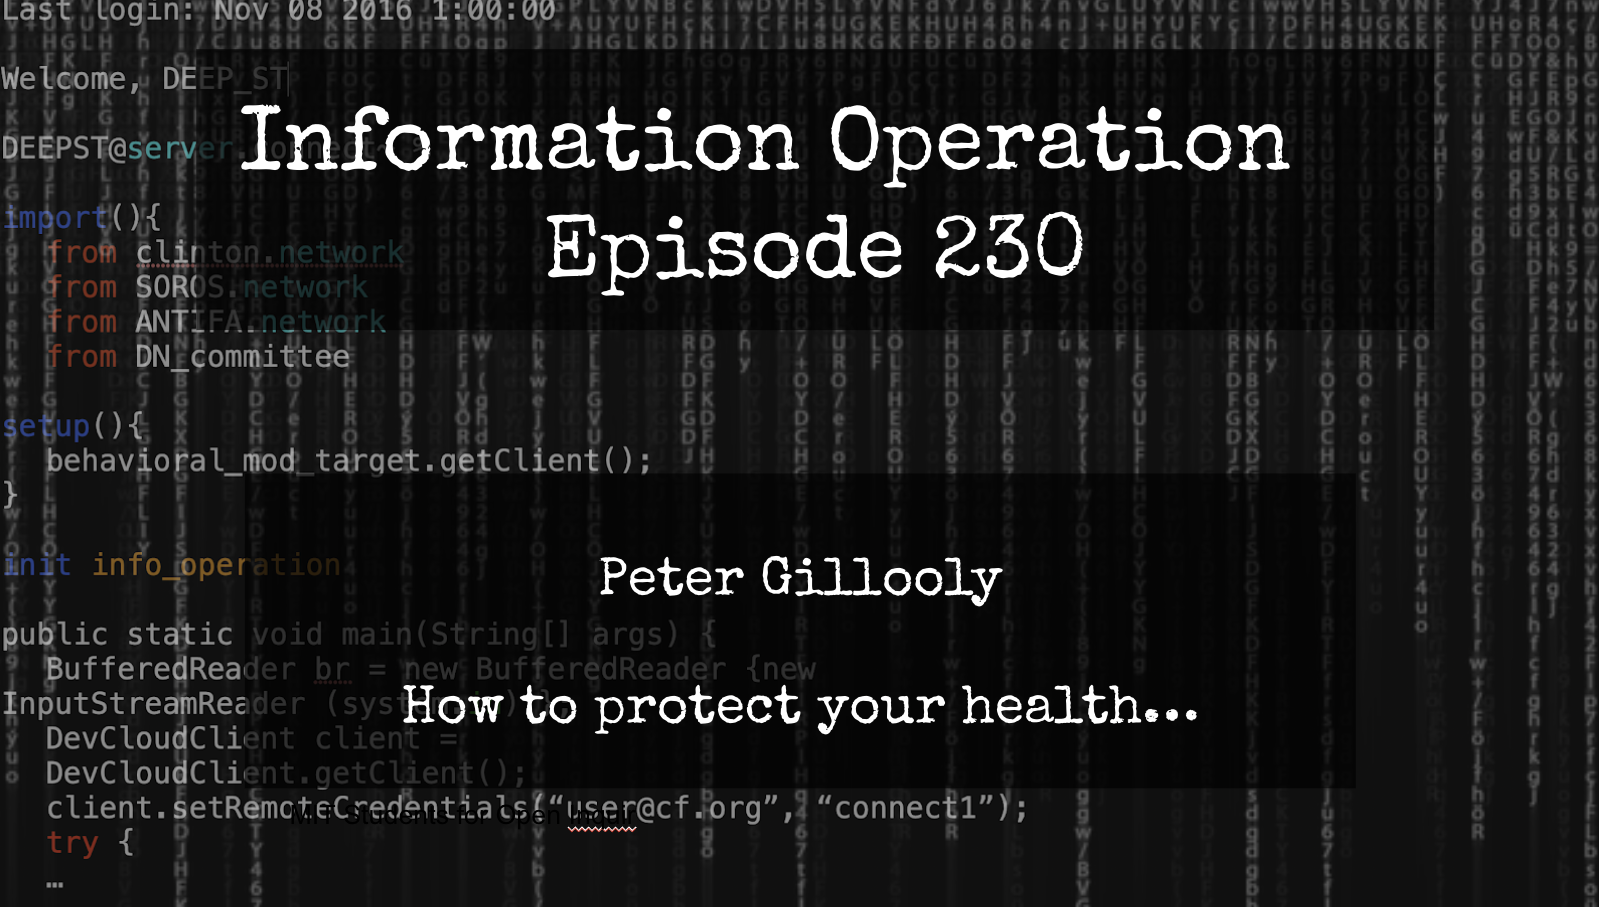 LIVE 5pm EST: IO Episode 230 - Peter Gillooly - How To Protect Your Healthcare